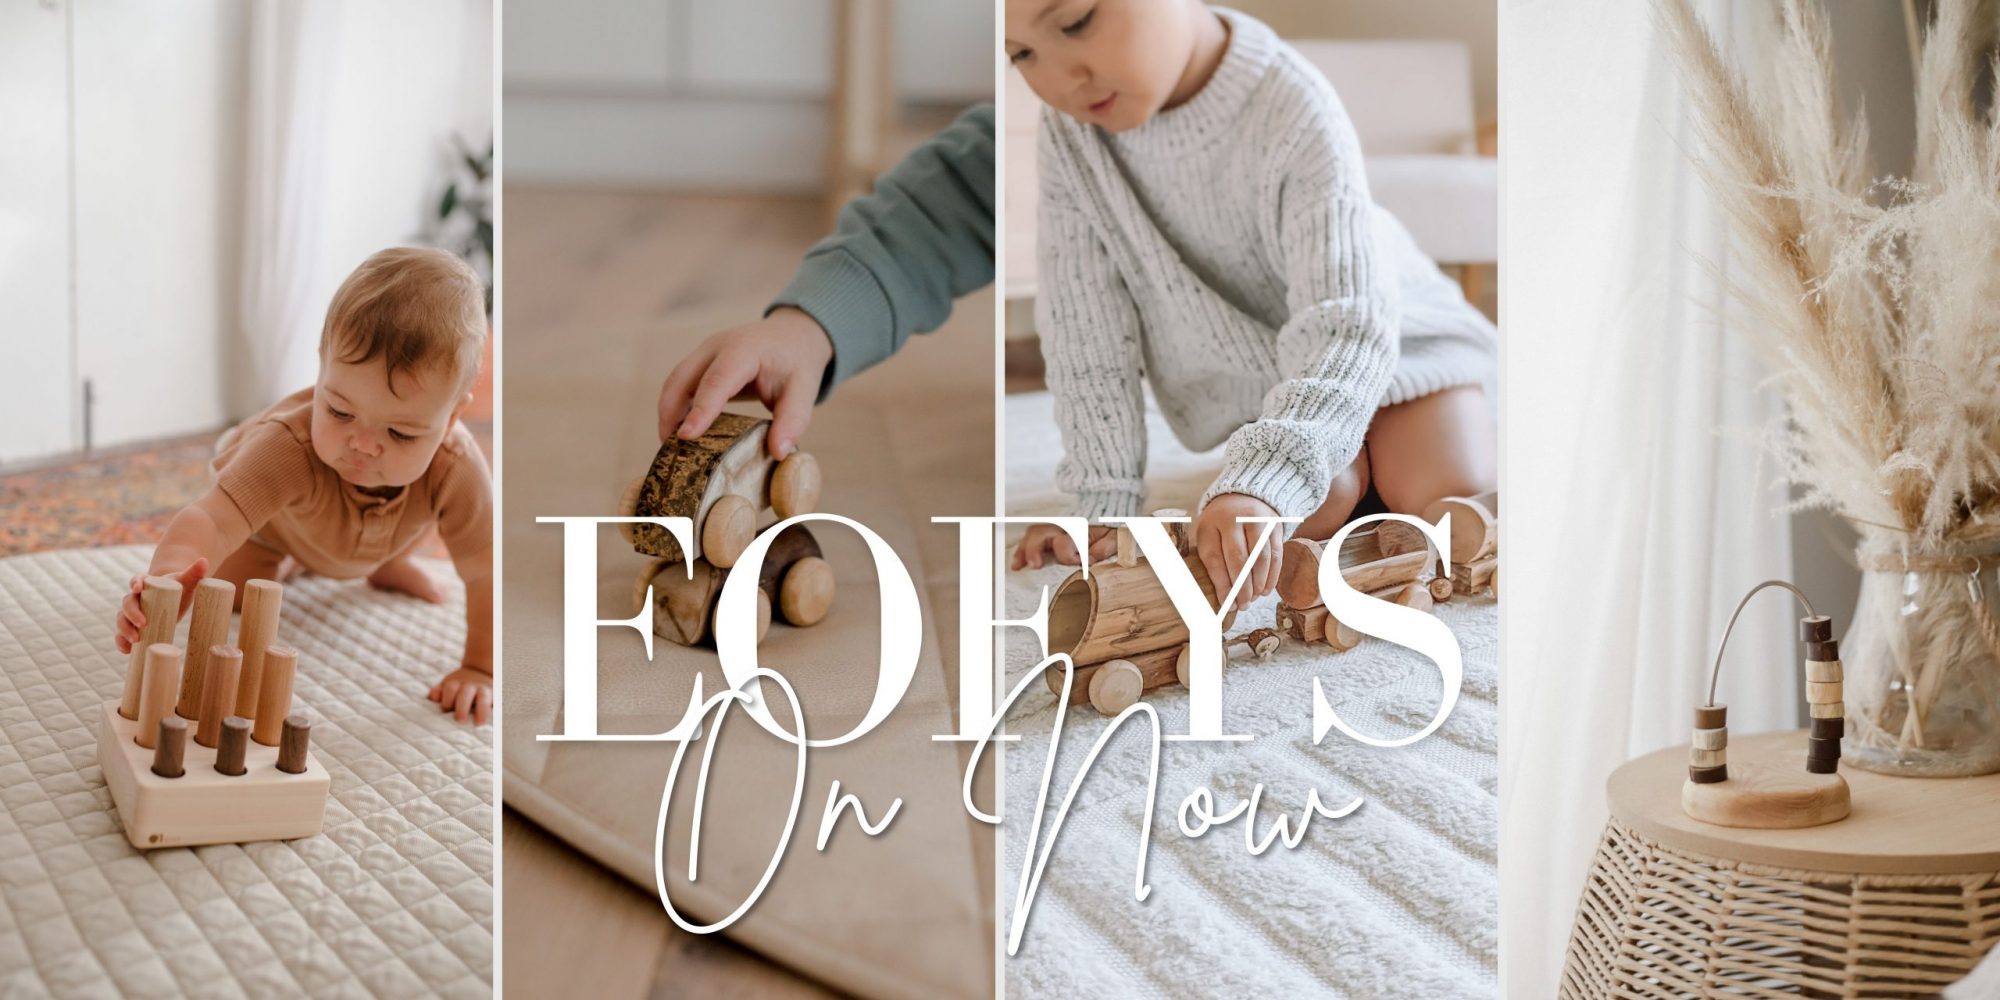 EOFYS WHOLESALE ONLY EVENT(1)